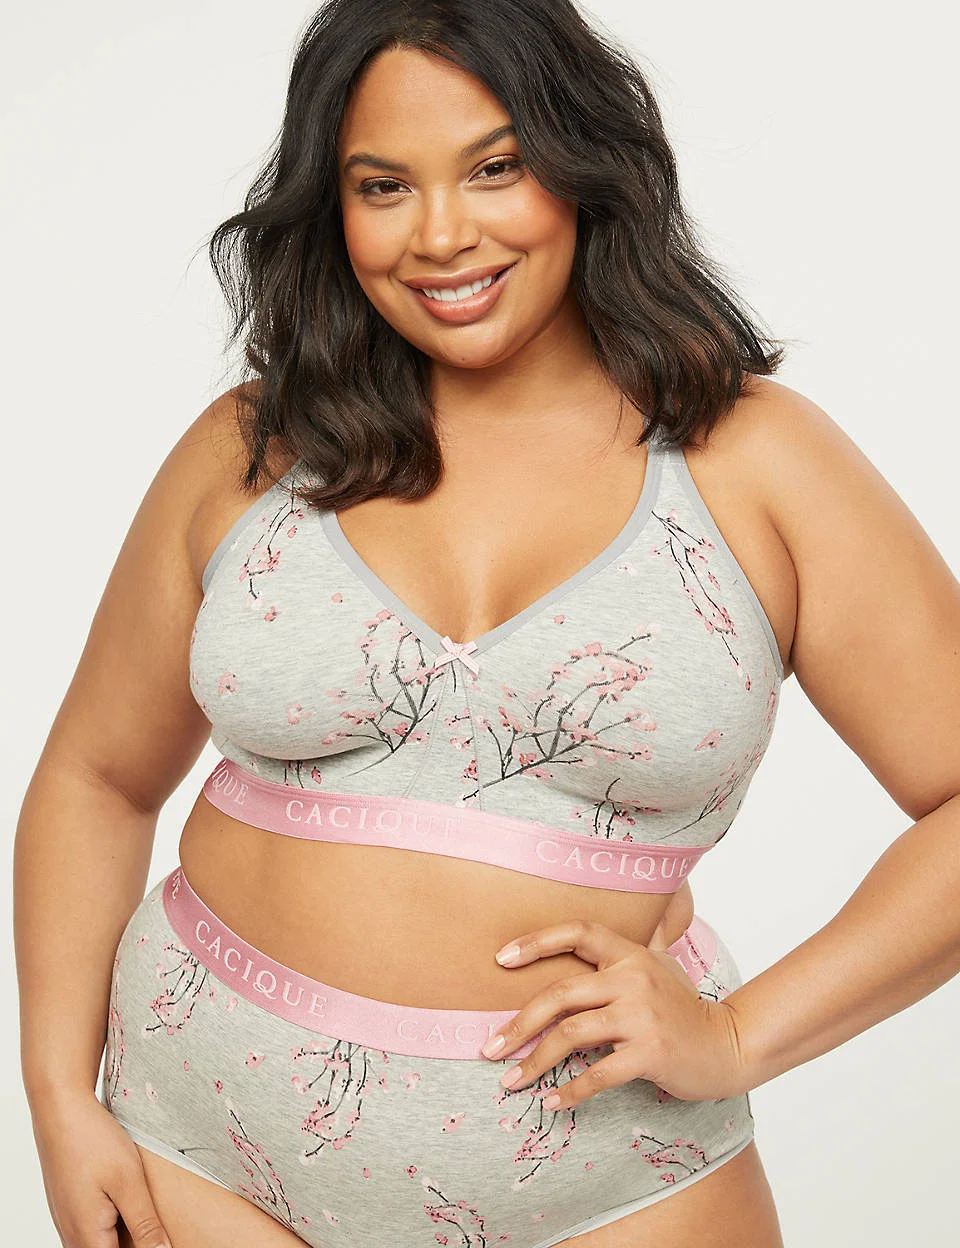 CURV Exchange Clearwater Plus Size REsale Boutique' - Sz 44D CACIQUE  LIGHTLY LINED NO WIRE T SHIRT BRA IN CUTE FLORAL PRINT! Available at Curv  Exchange Clearwater, located at 1916 Gulf to